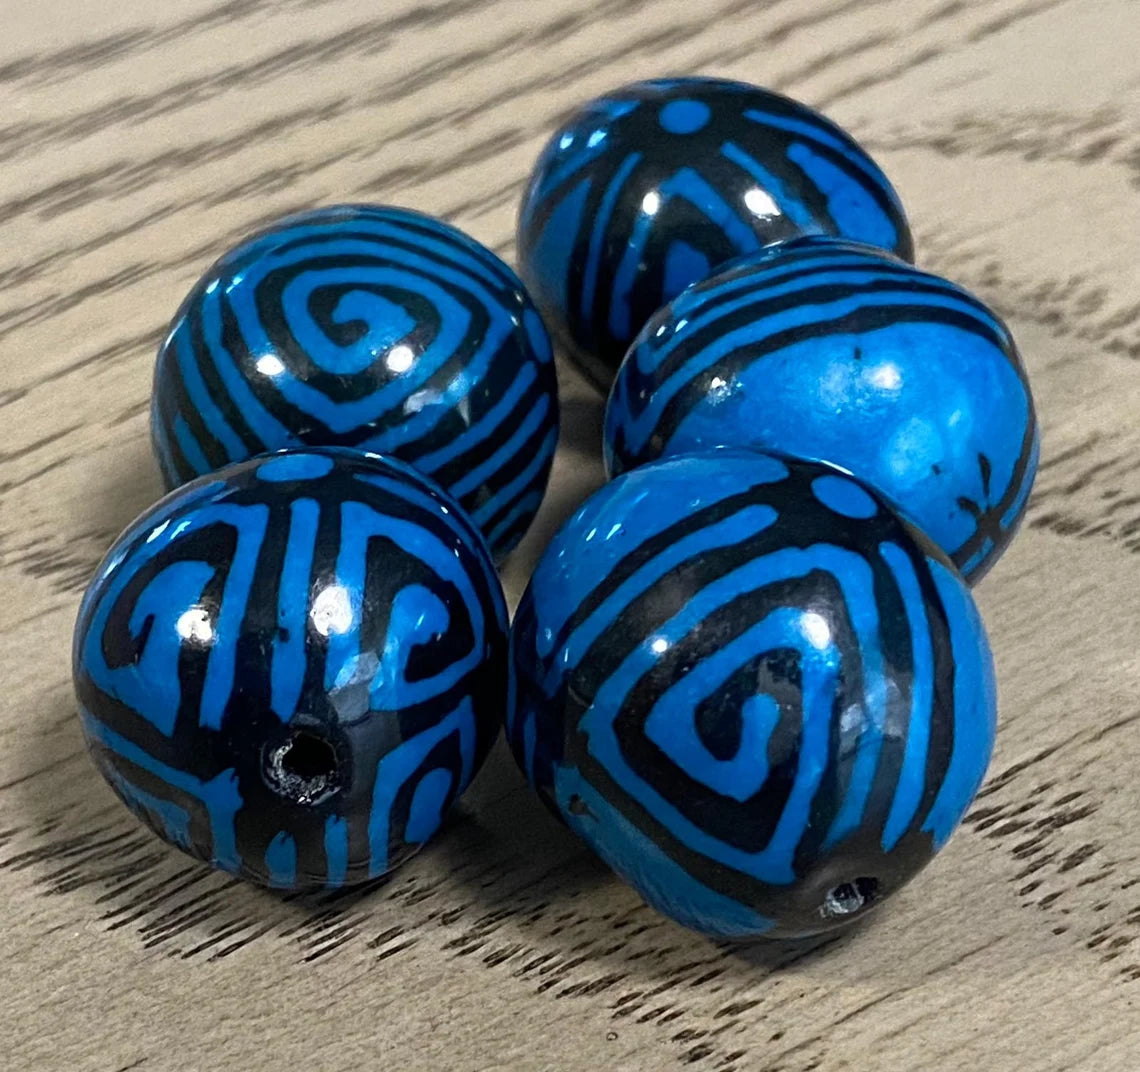 Bombona Ball Beads. 30 Multicolored Patterned Pieces.